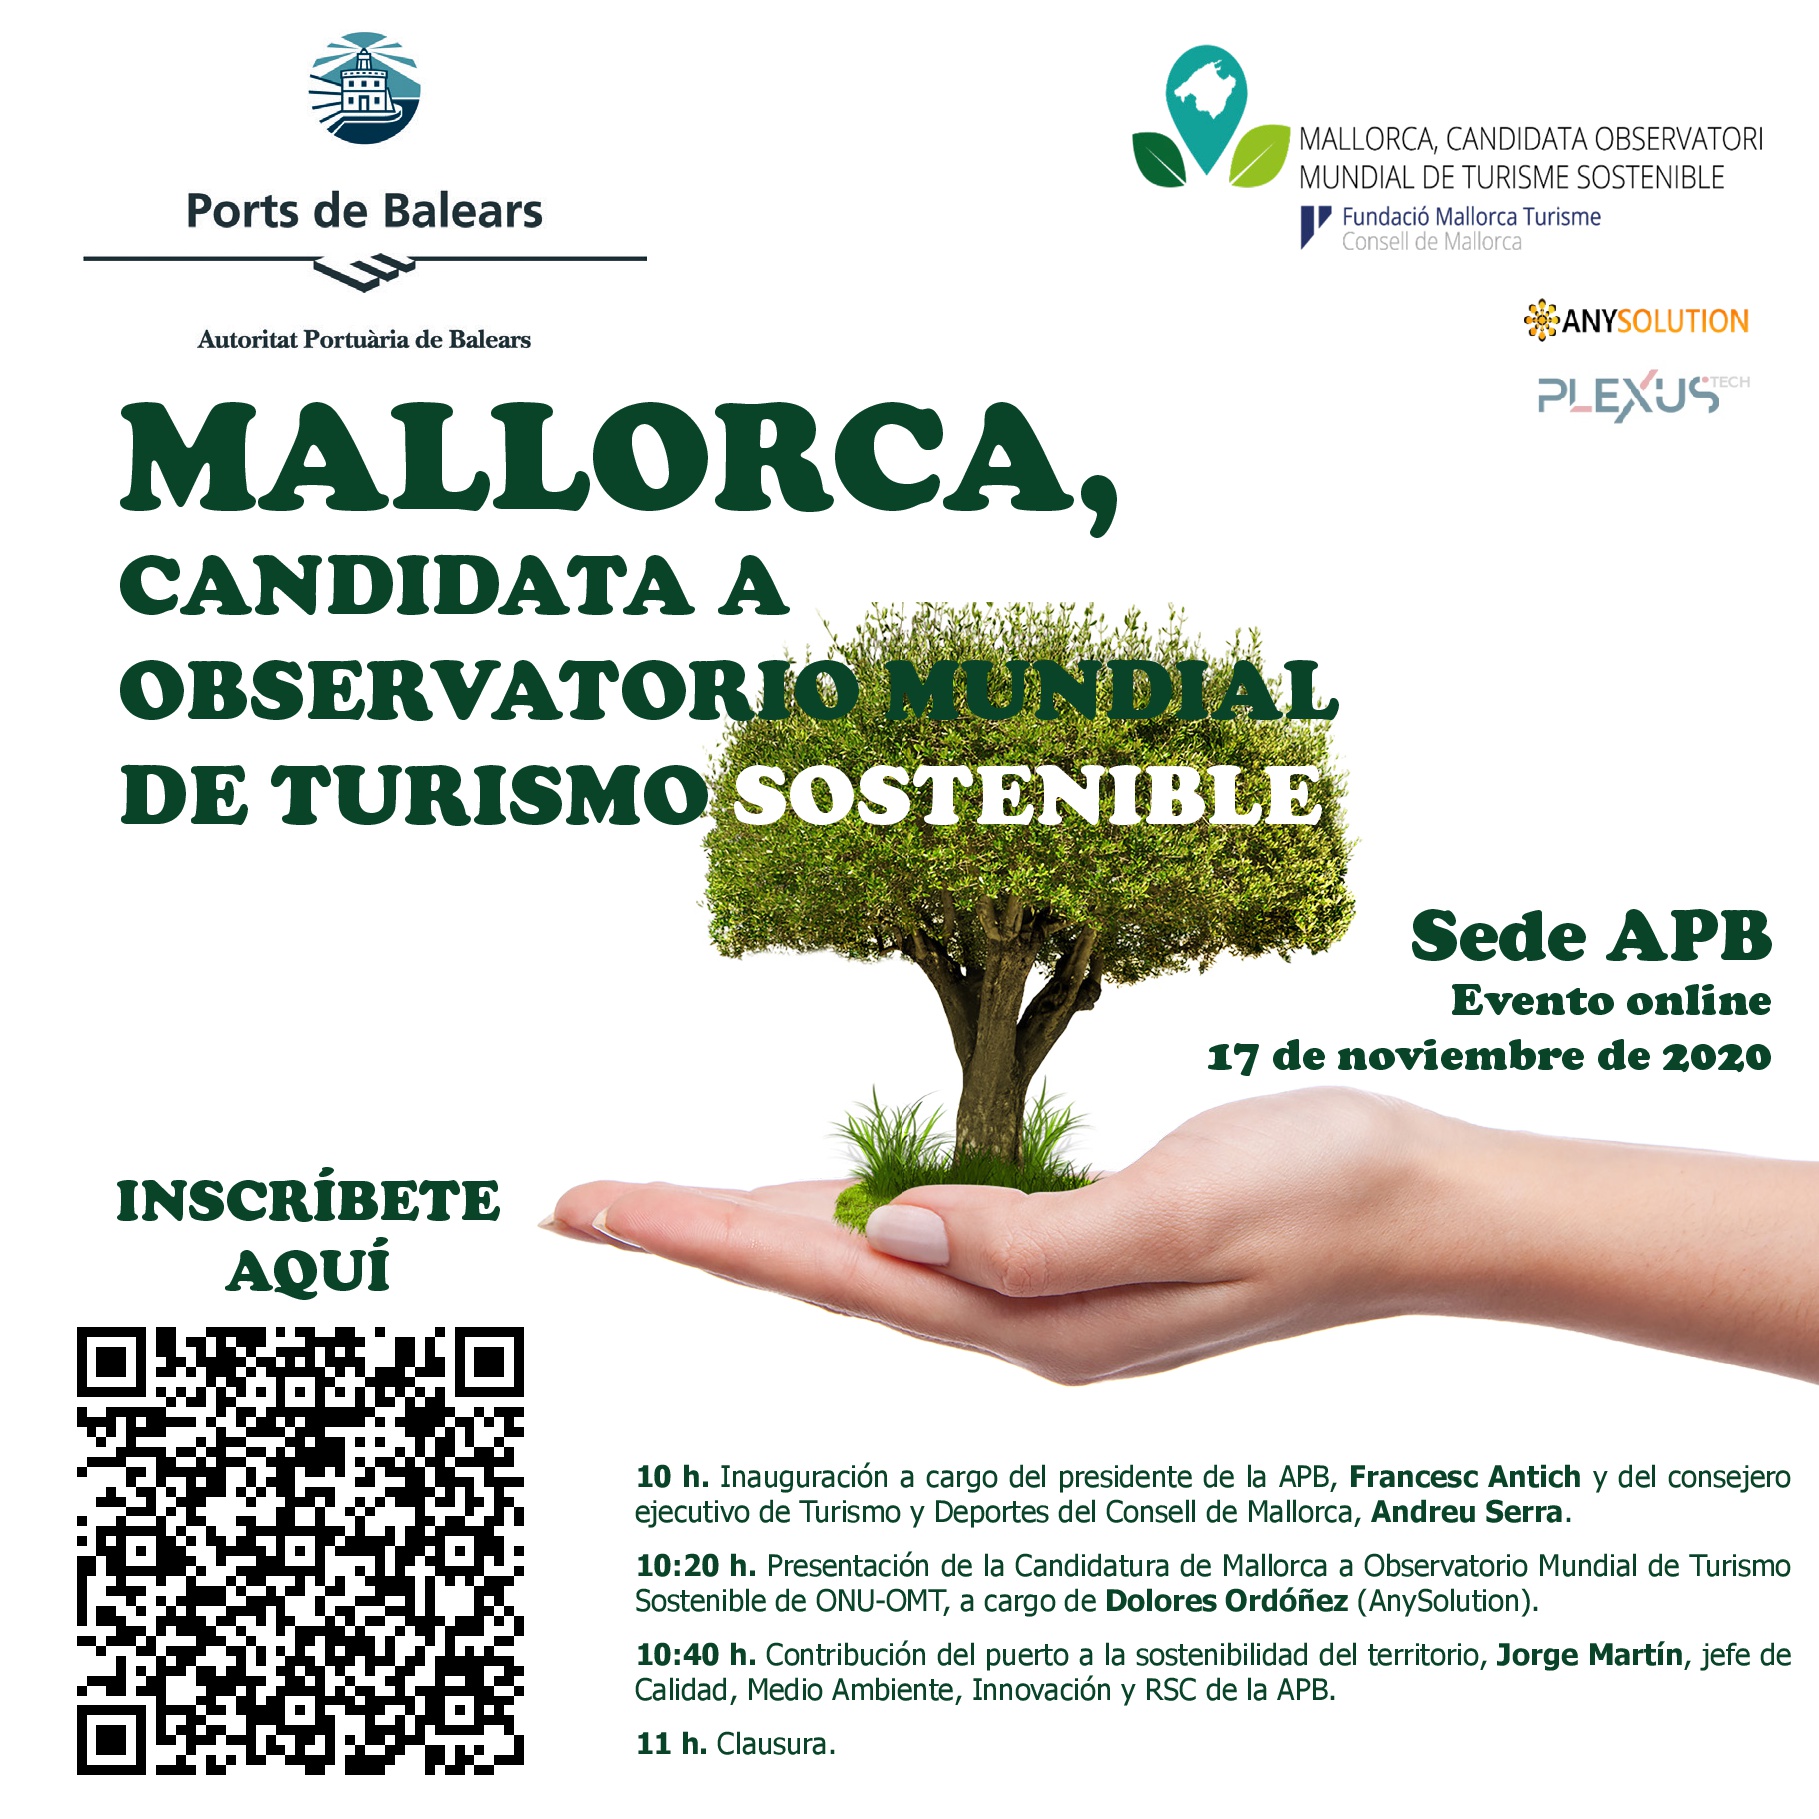 The APB supports Majorca's candidacy as a Sustainable Tourism Observatory 